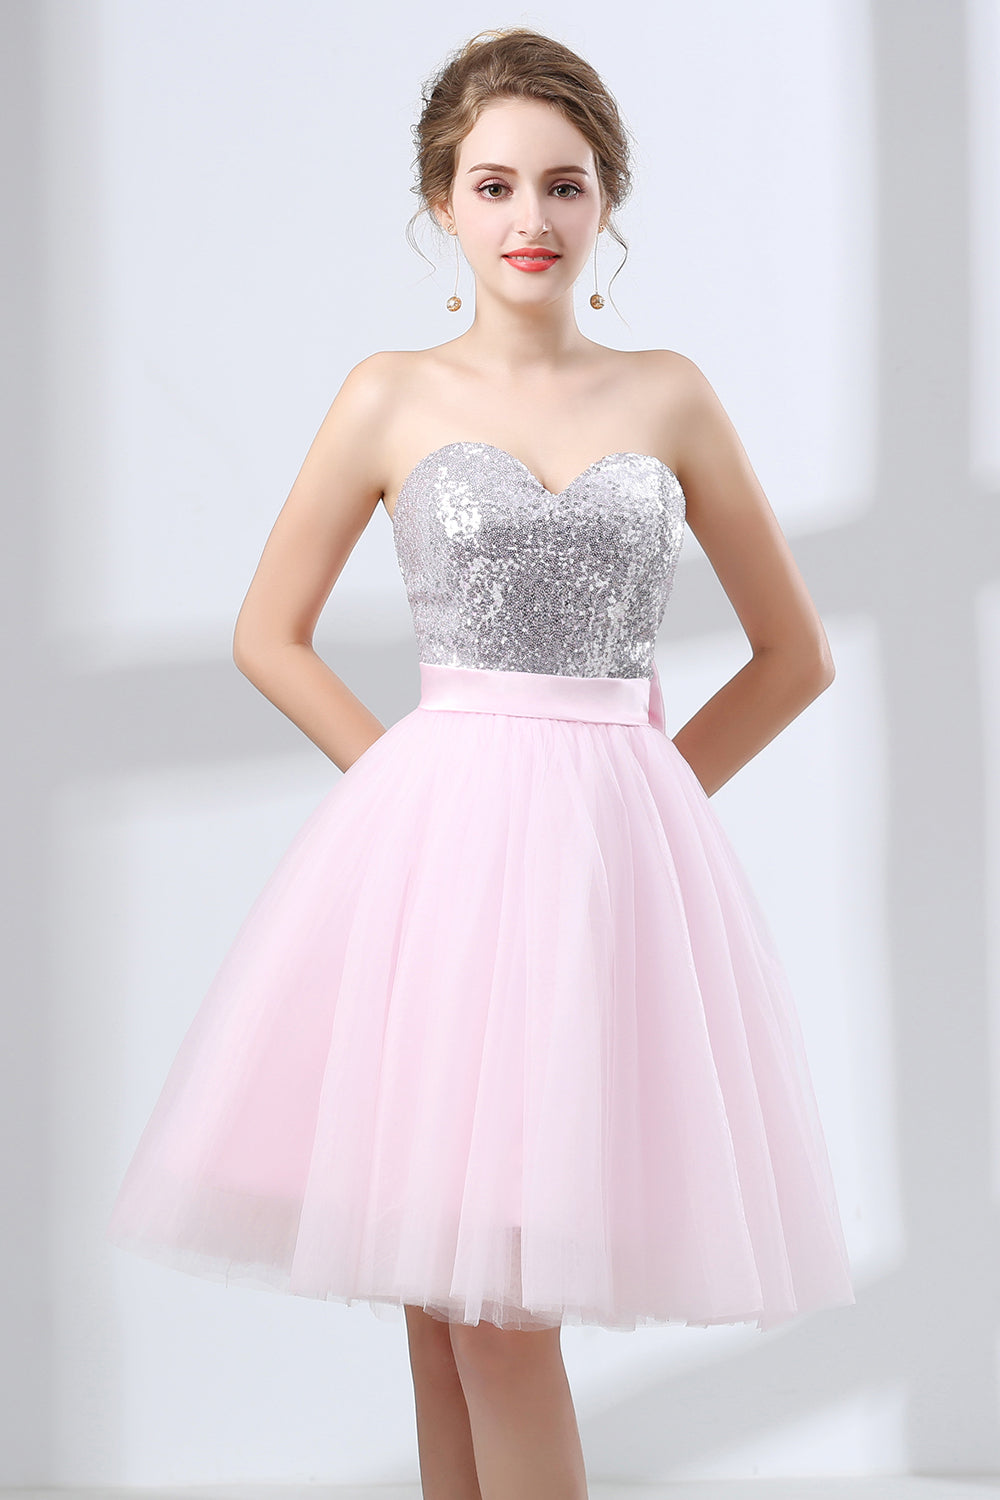 Evening Dress Fitted, Sequin Lace & Tulle Sweetheart Neckline Short Length A-line Bridesmaid Dresses